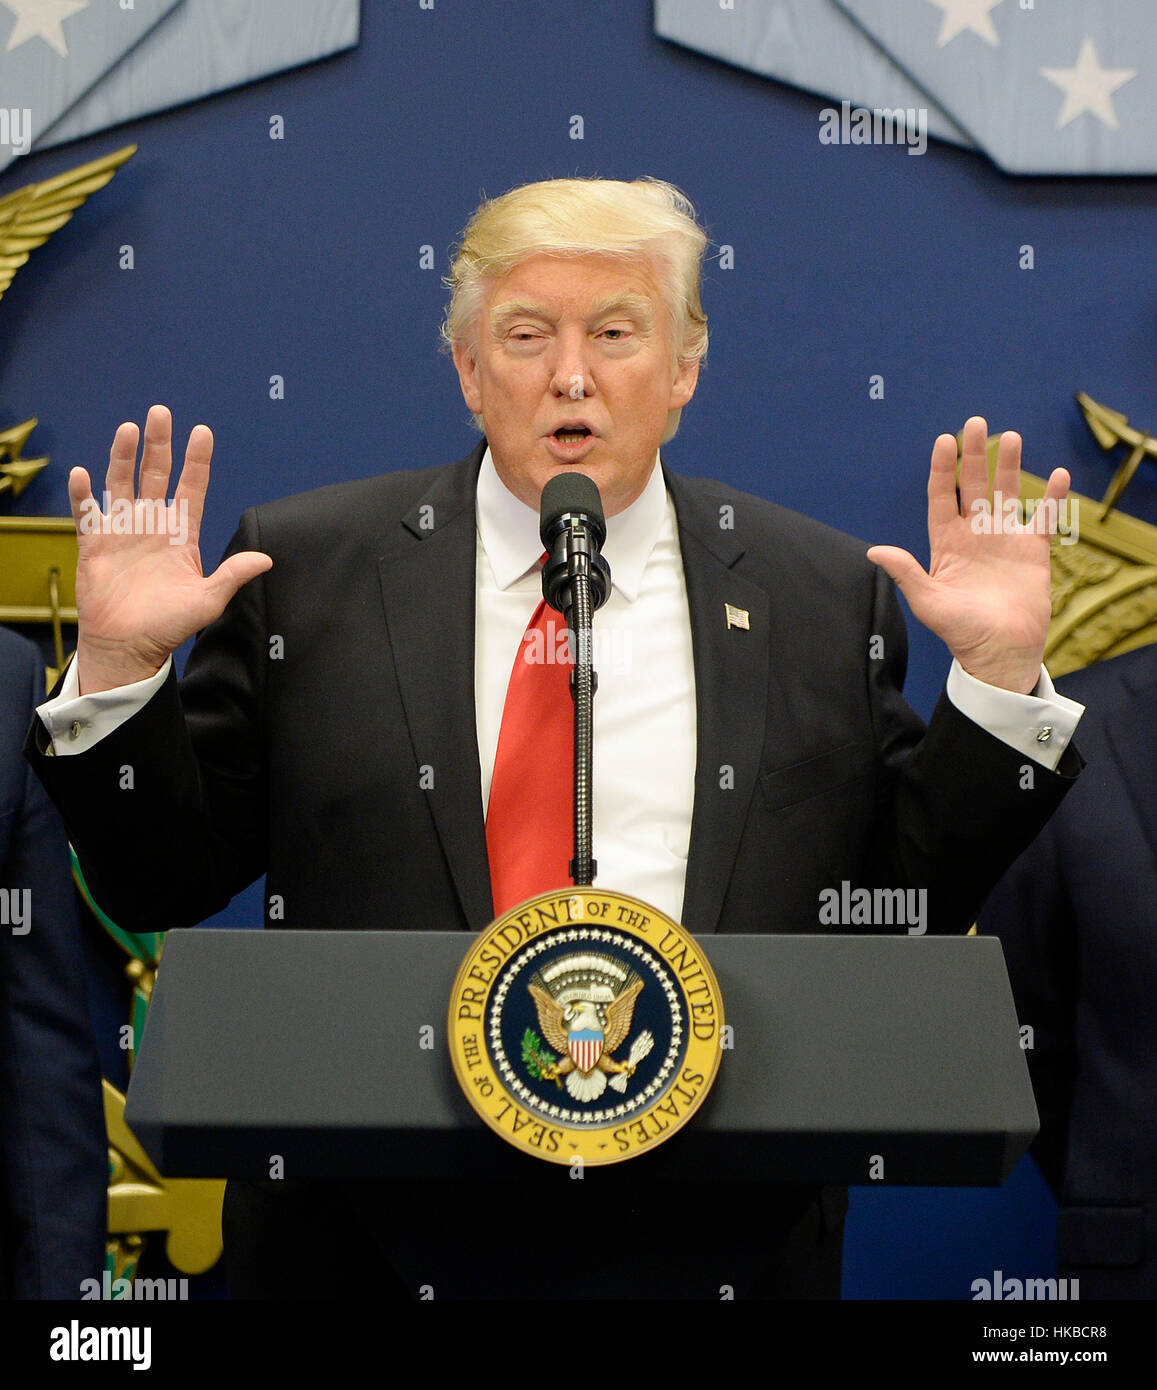 Washington DC, USA. 27th Jan, 2017. United States President Donald Trump speaks before signing Executive Orders in the Hall of Heroes at the Department of Defense in Virginia, January 27, 2017. Credit: Olivier Douliery/Pool via CNP /MediaPunch Credit: MediaPunch Inc/Alamy Live News Stock Photo